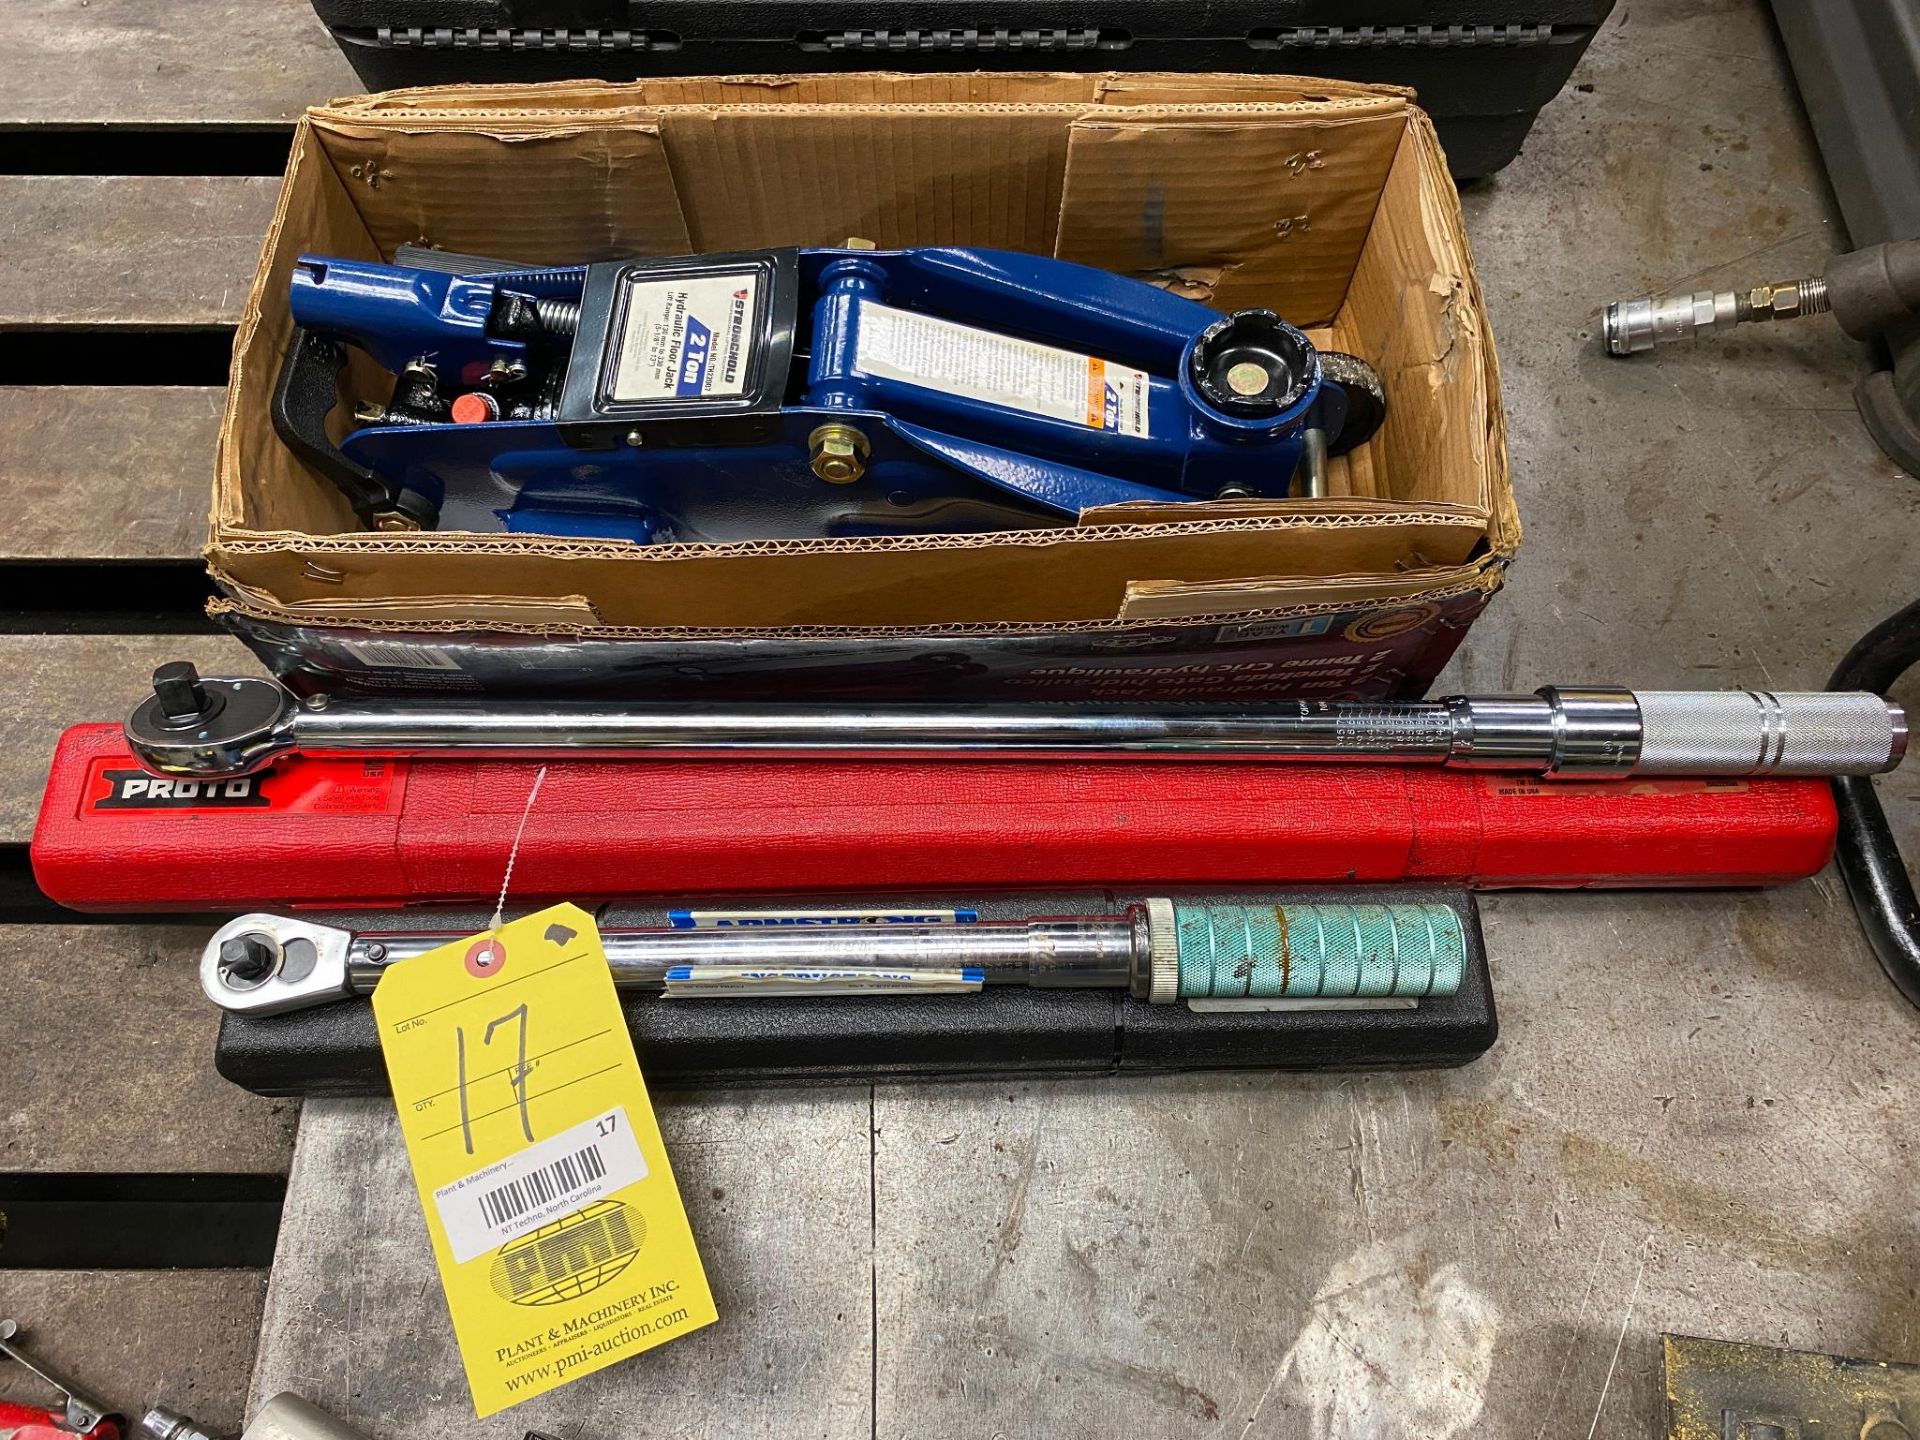 LOT CONSISTING OF: (1) Proto 1/2" drive ratchet head, micrometer torque wrench, Mdl. 6014C & (11)